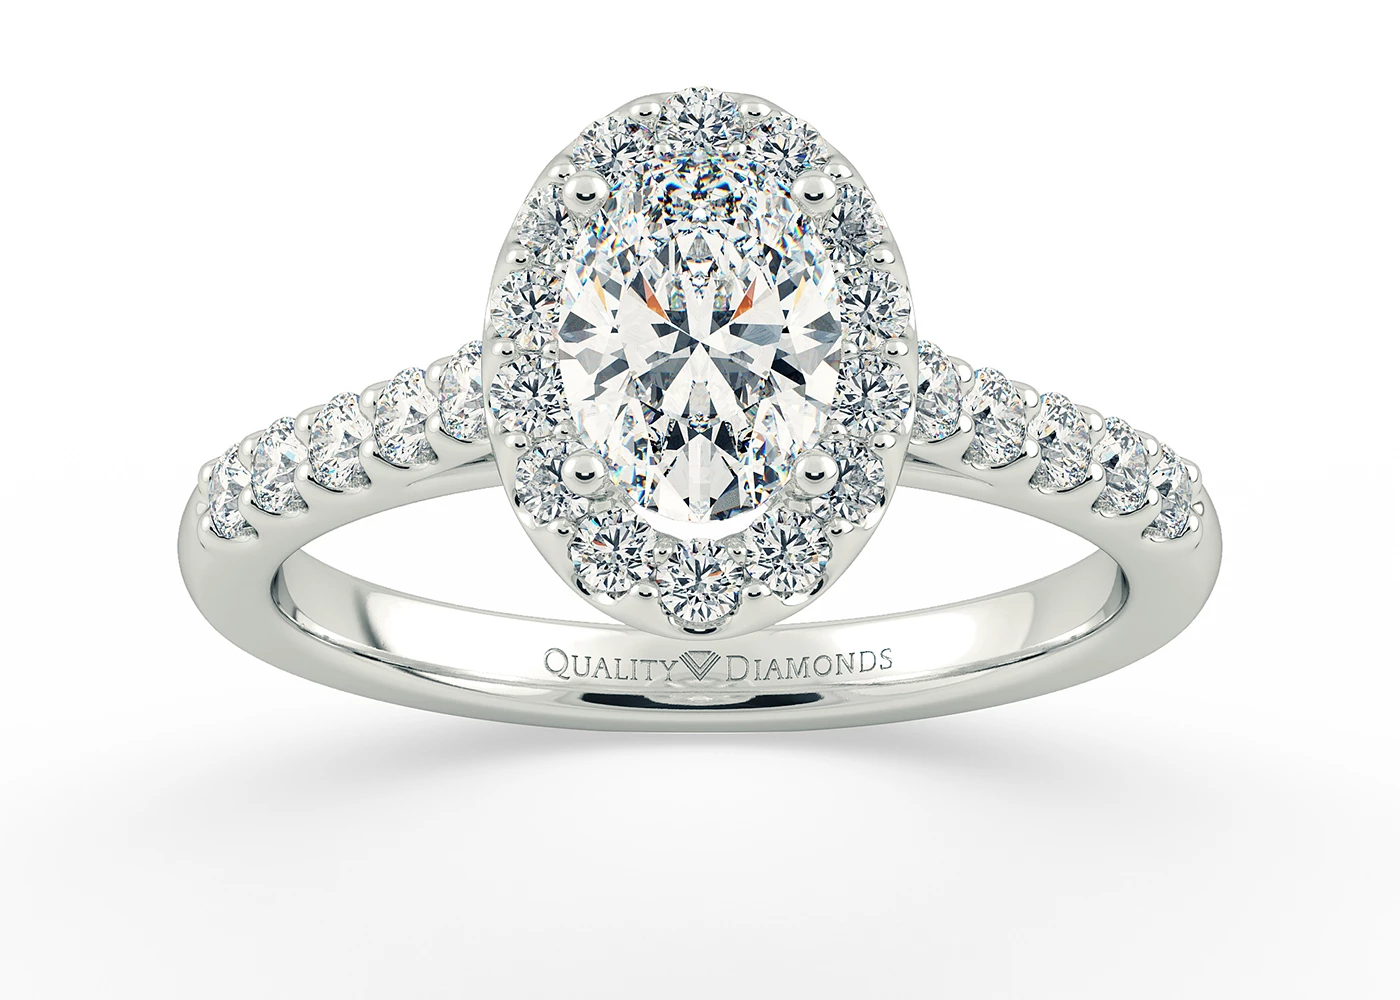 One Carat Lab Grown Oval Halo Diamond Ring in 9K White Gold